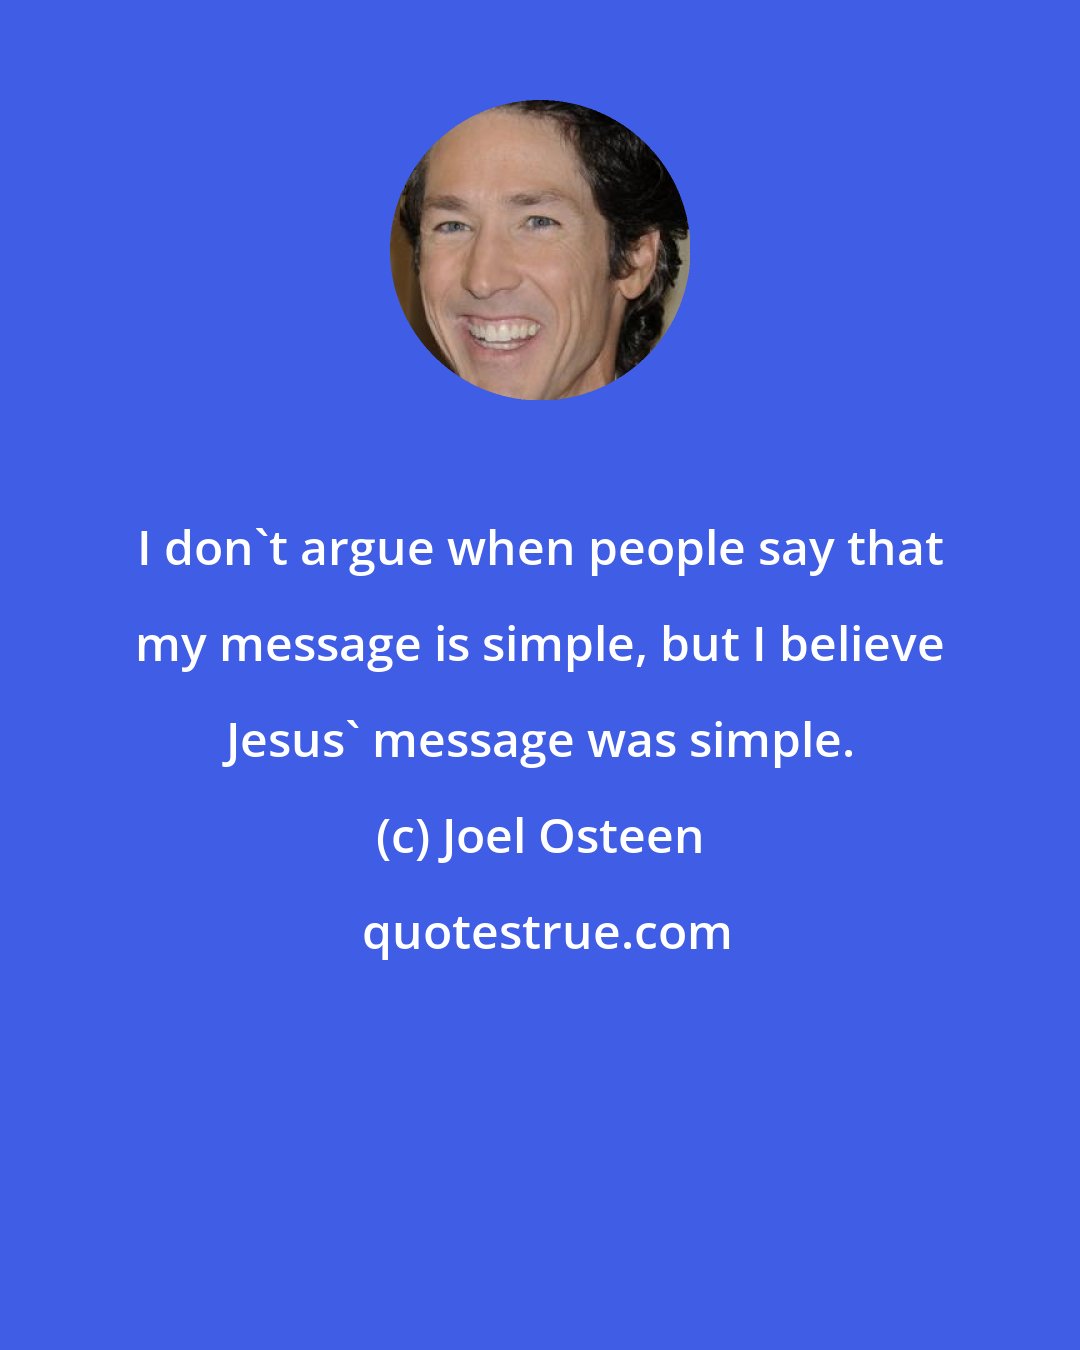 Joel Osteen: I don't argue when people say that my message is simple, but I believe Jesus' message was simple.